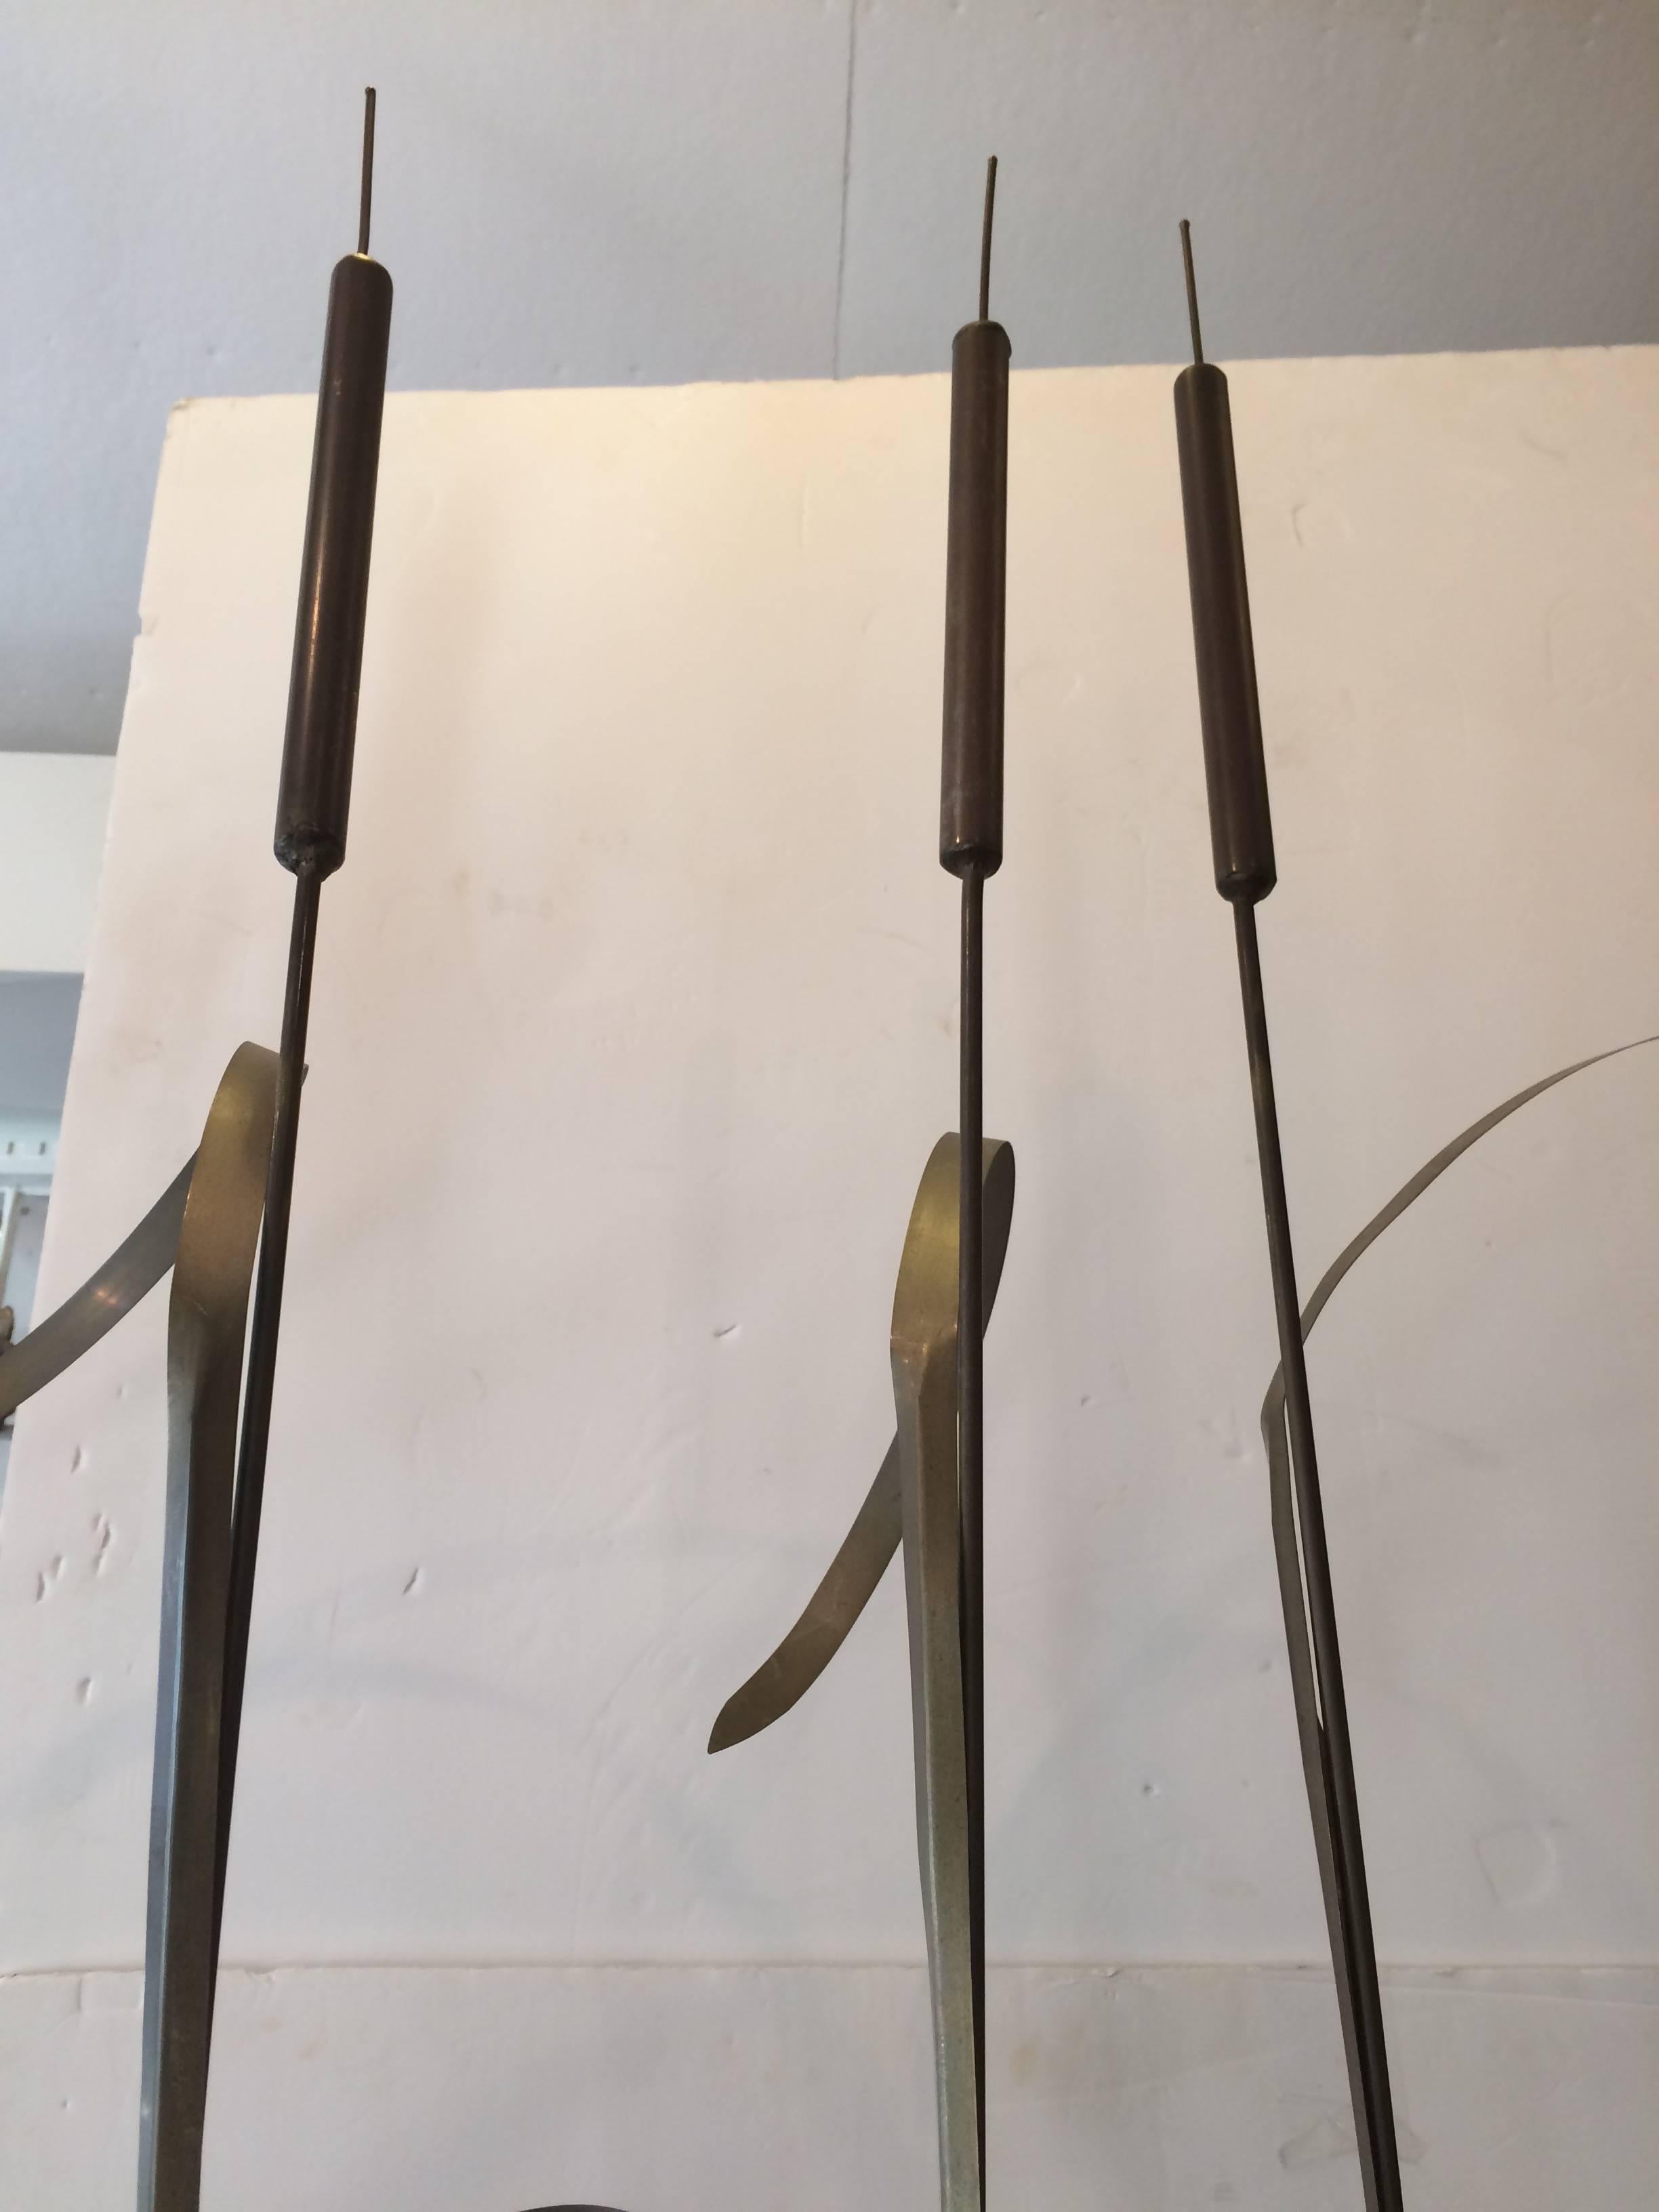 Very striking modern sculpture having three elongated brass stalks of wheat that stand upright in a sleek custom white marble base. One of a kind creation. Nice on the floor or up high on a console.